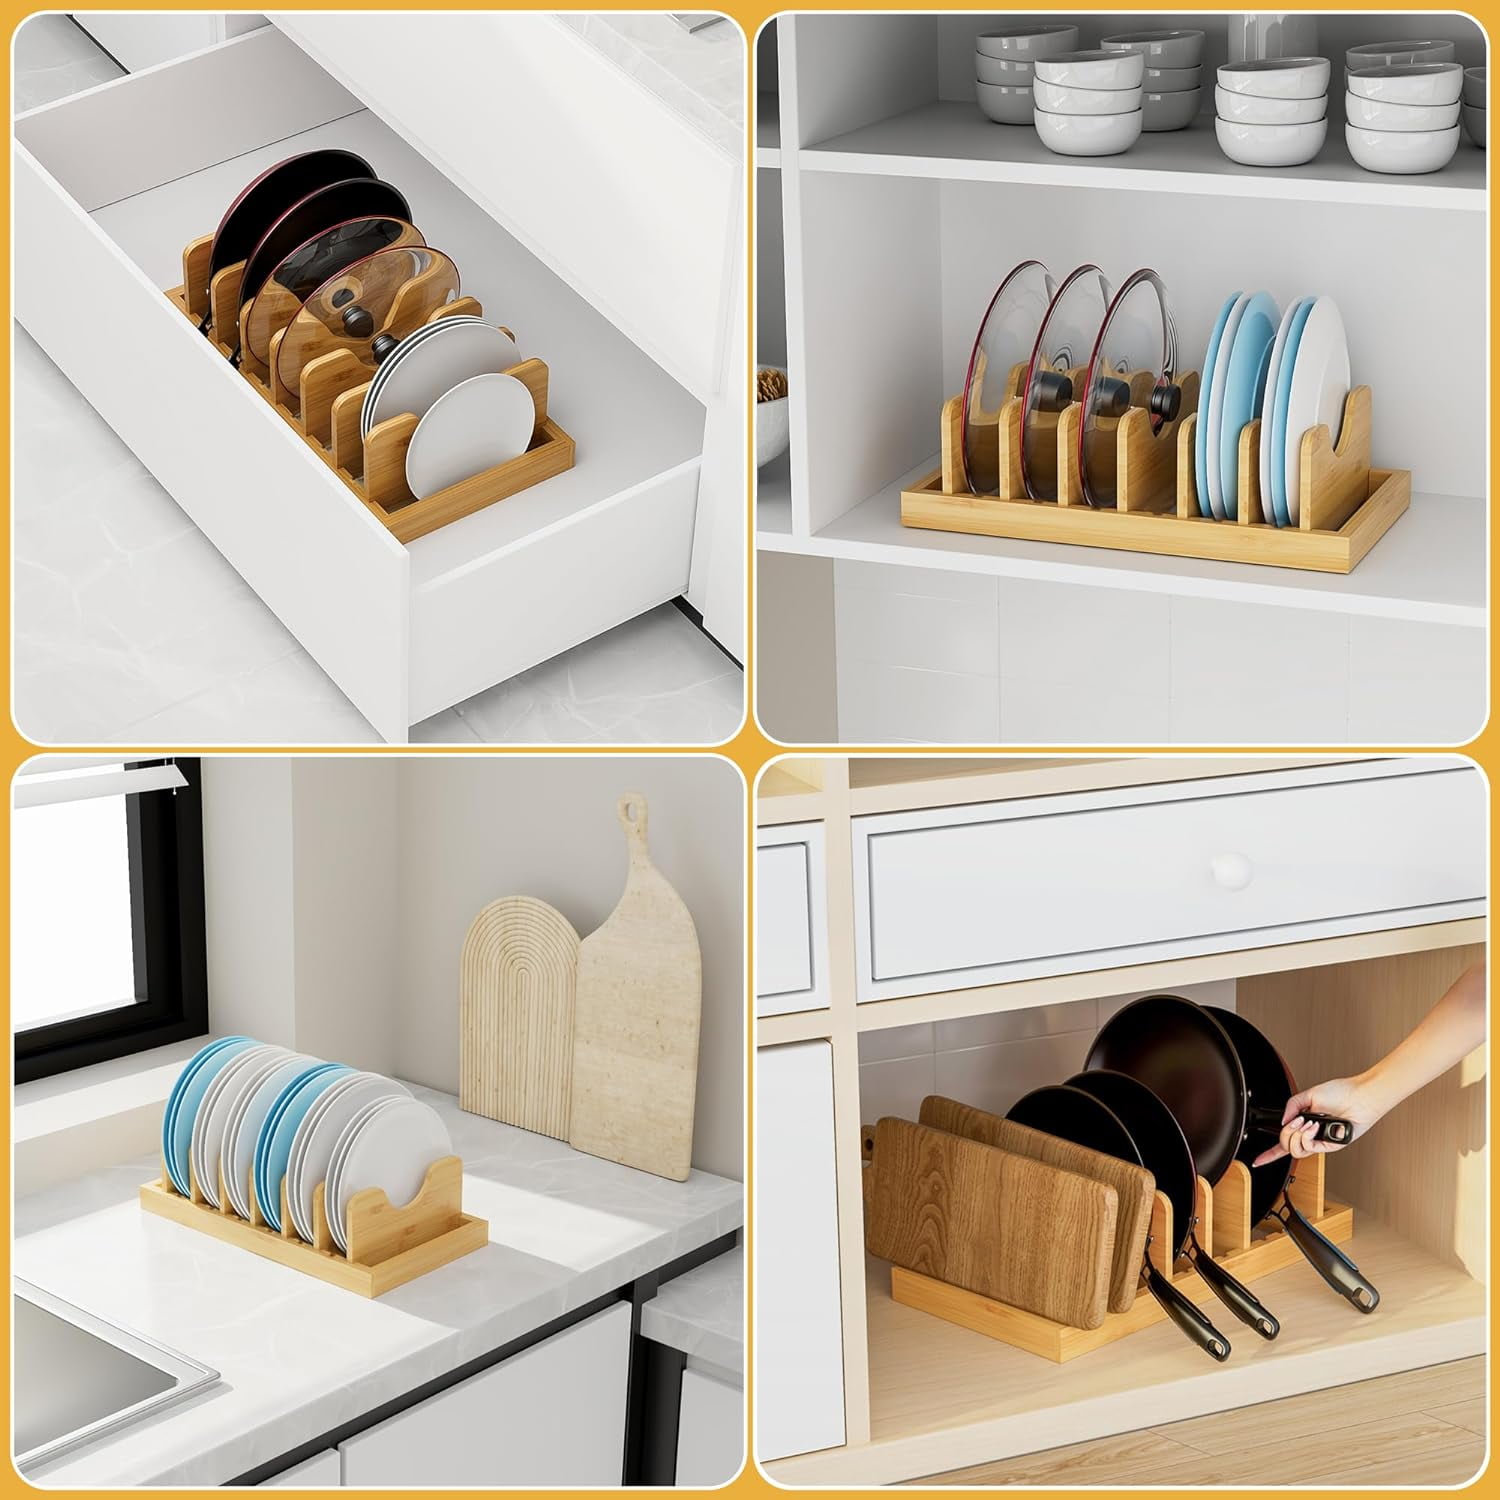 Mobilevision Bamboo Pot Lid Holder Organizer for Storage in Cabinets or Kitchen Countertops and Cupboards